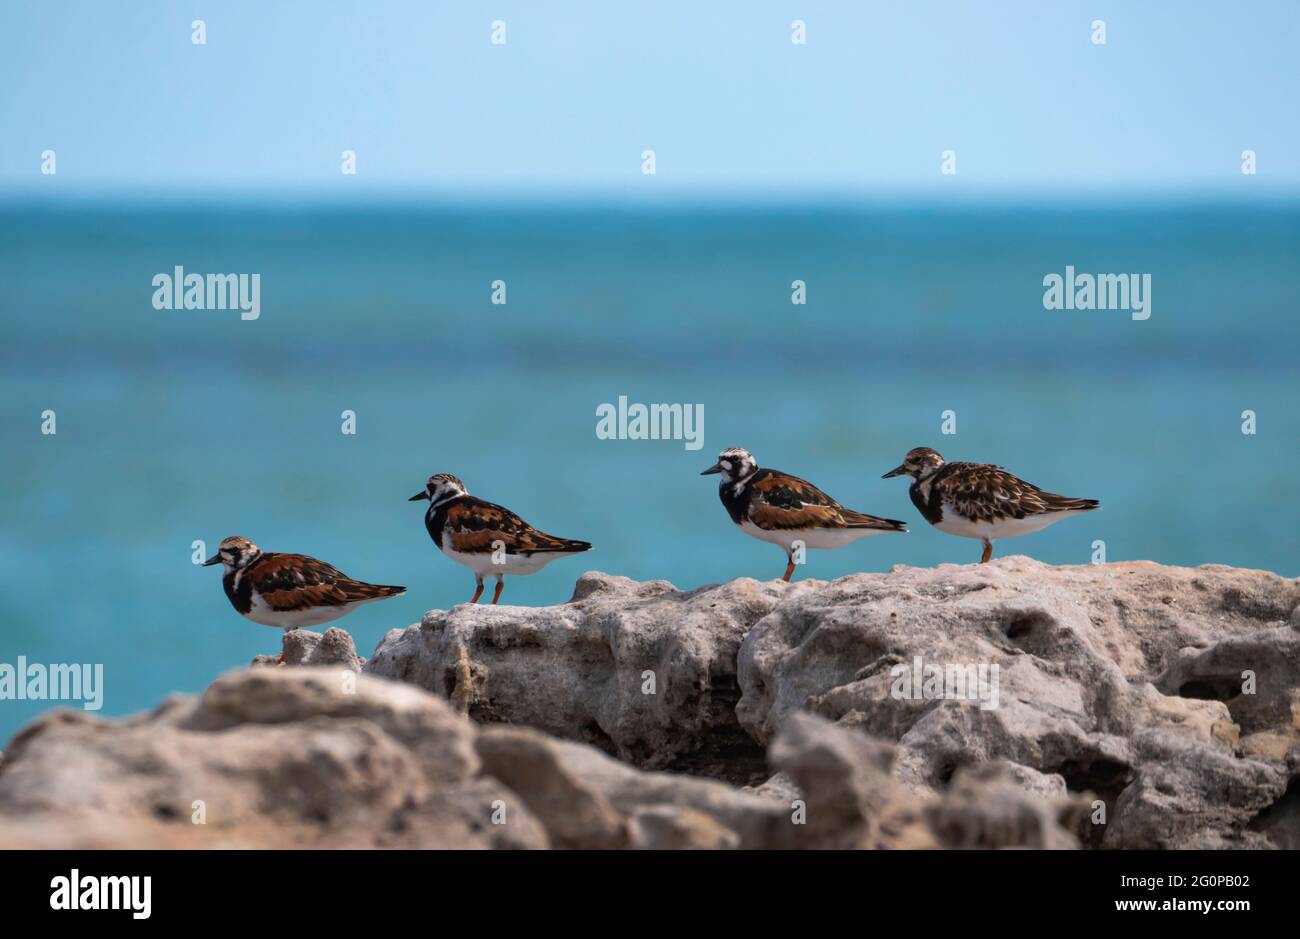 Rudy Turnstones, Arenaria interpres, sandpiper birds sitting on a rocky outcrop with blue ocean water behind. Stock Photo